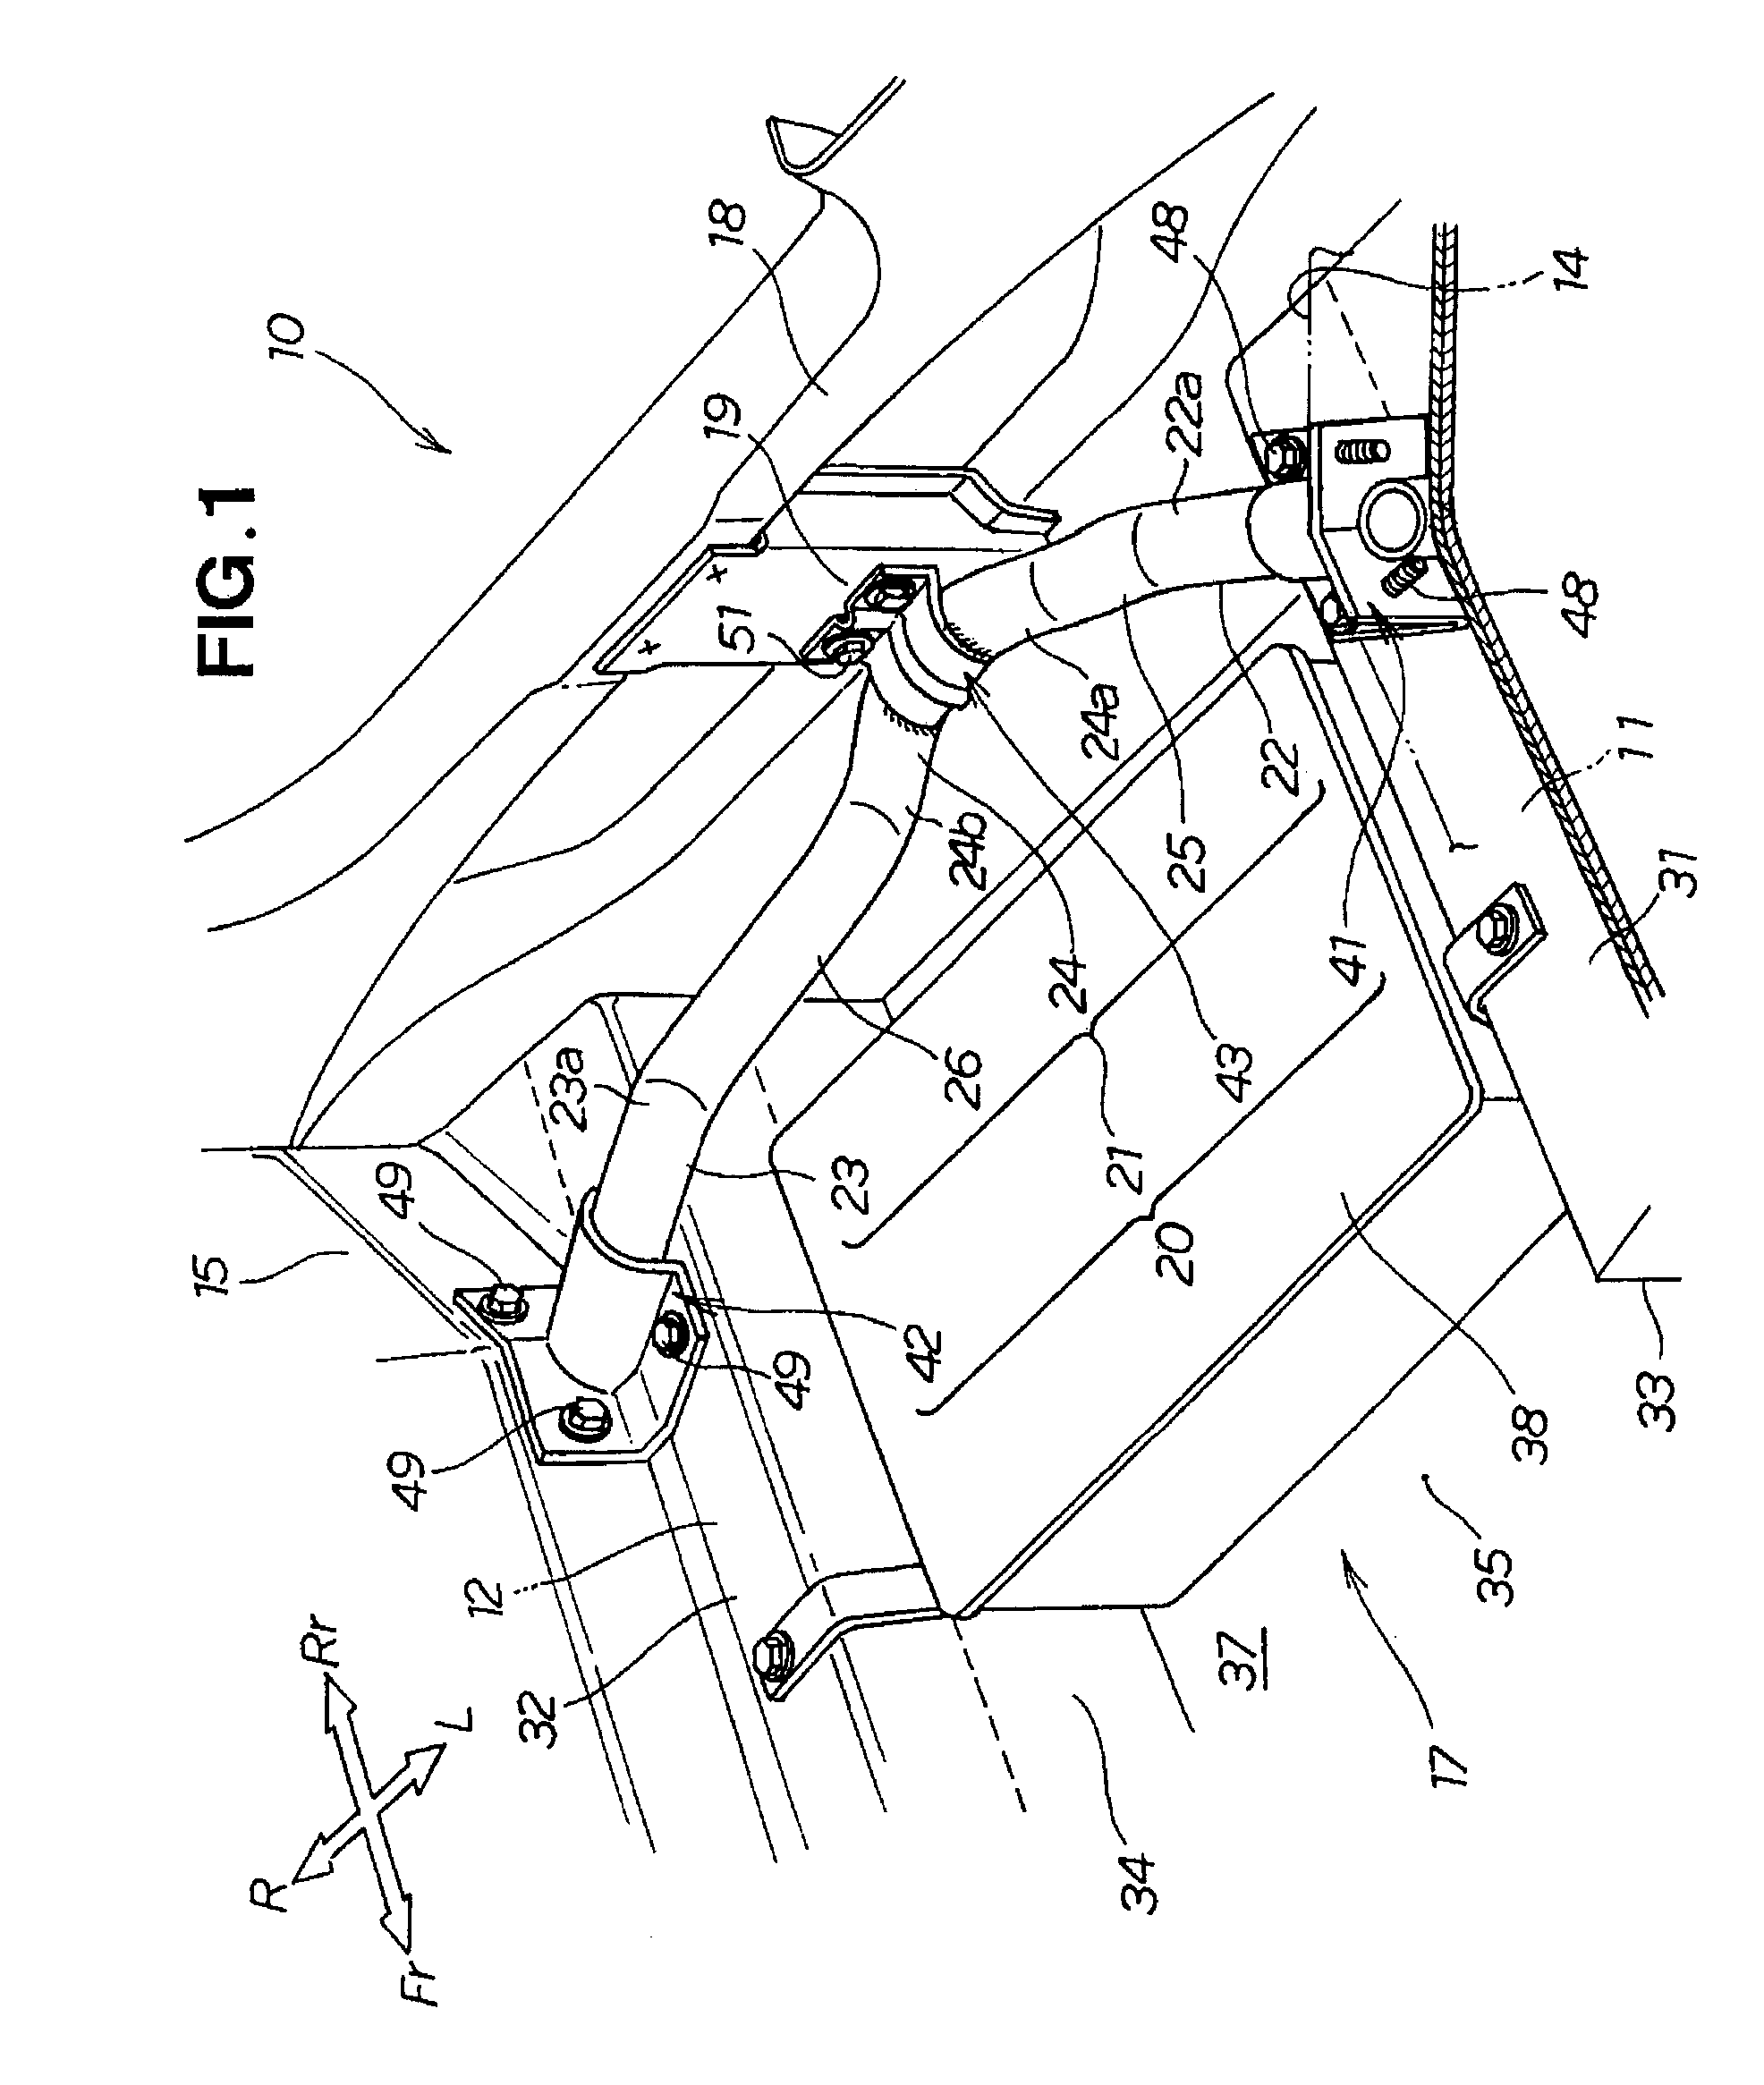 Rear frame structure for vehicle